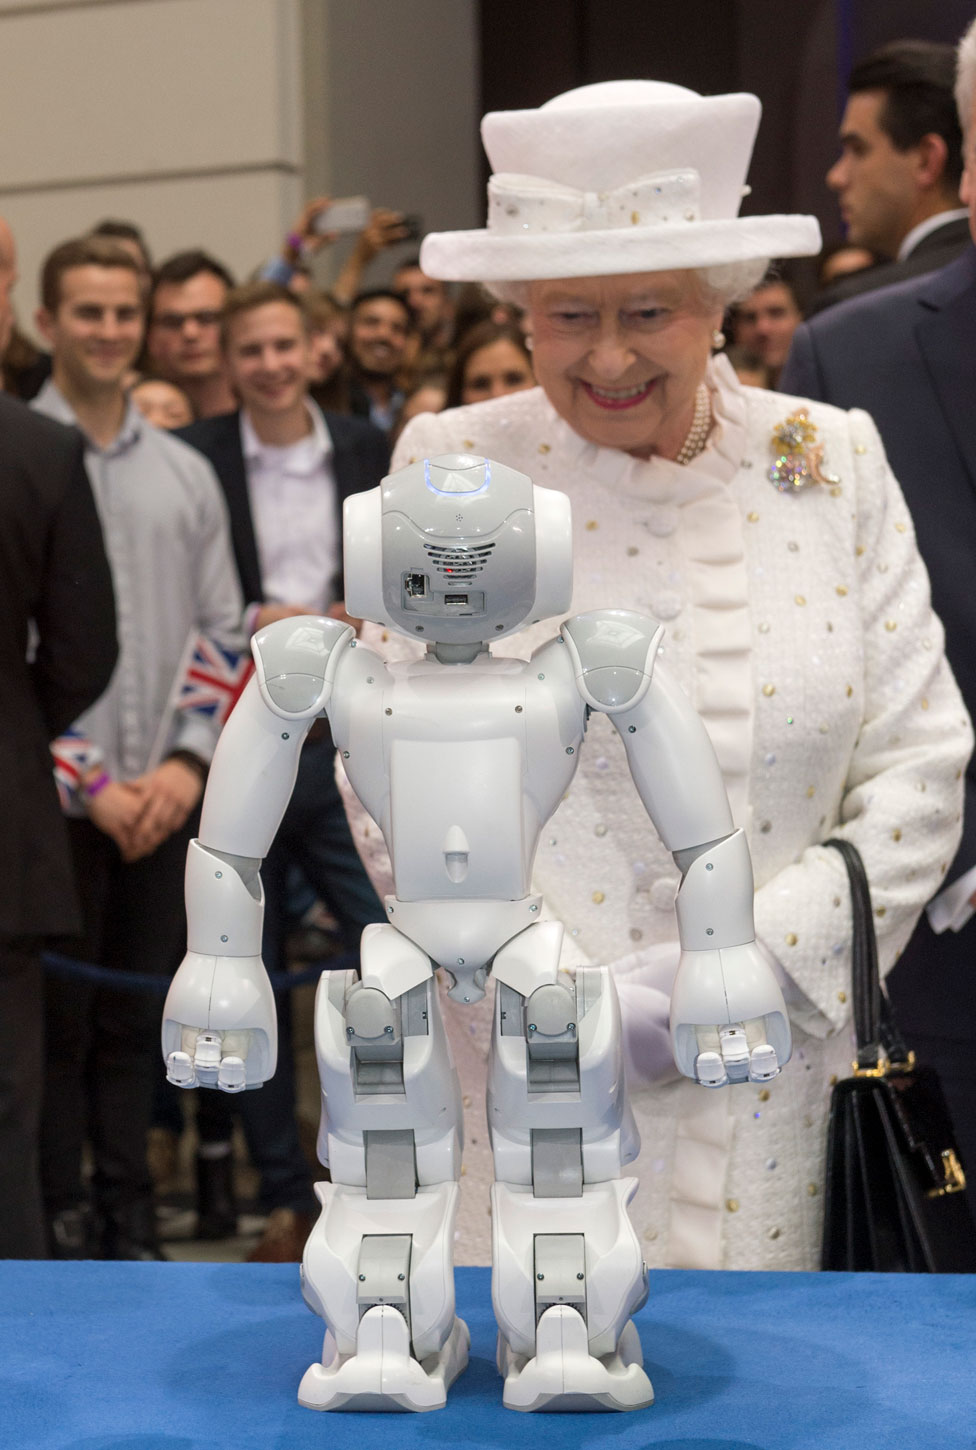 Queen in white hat looking at robot